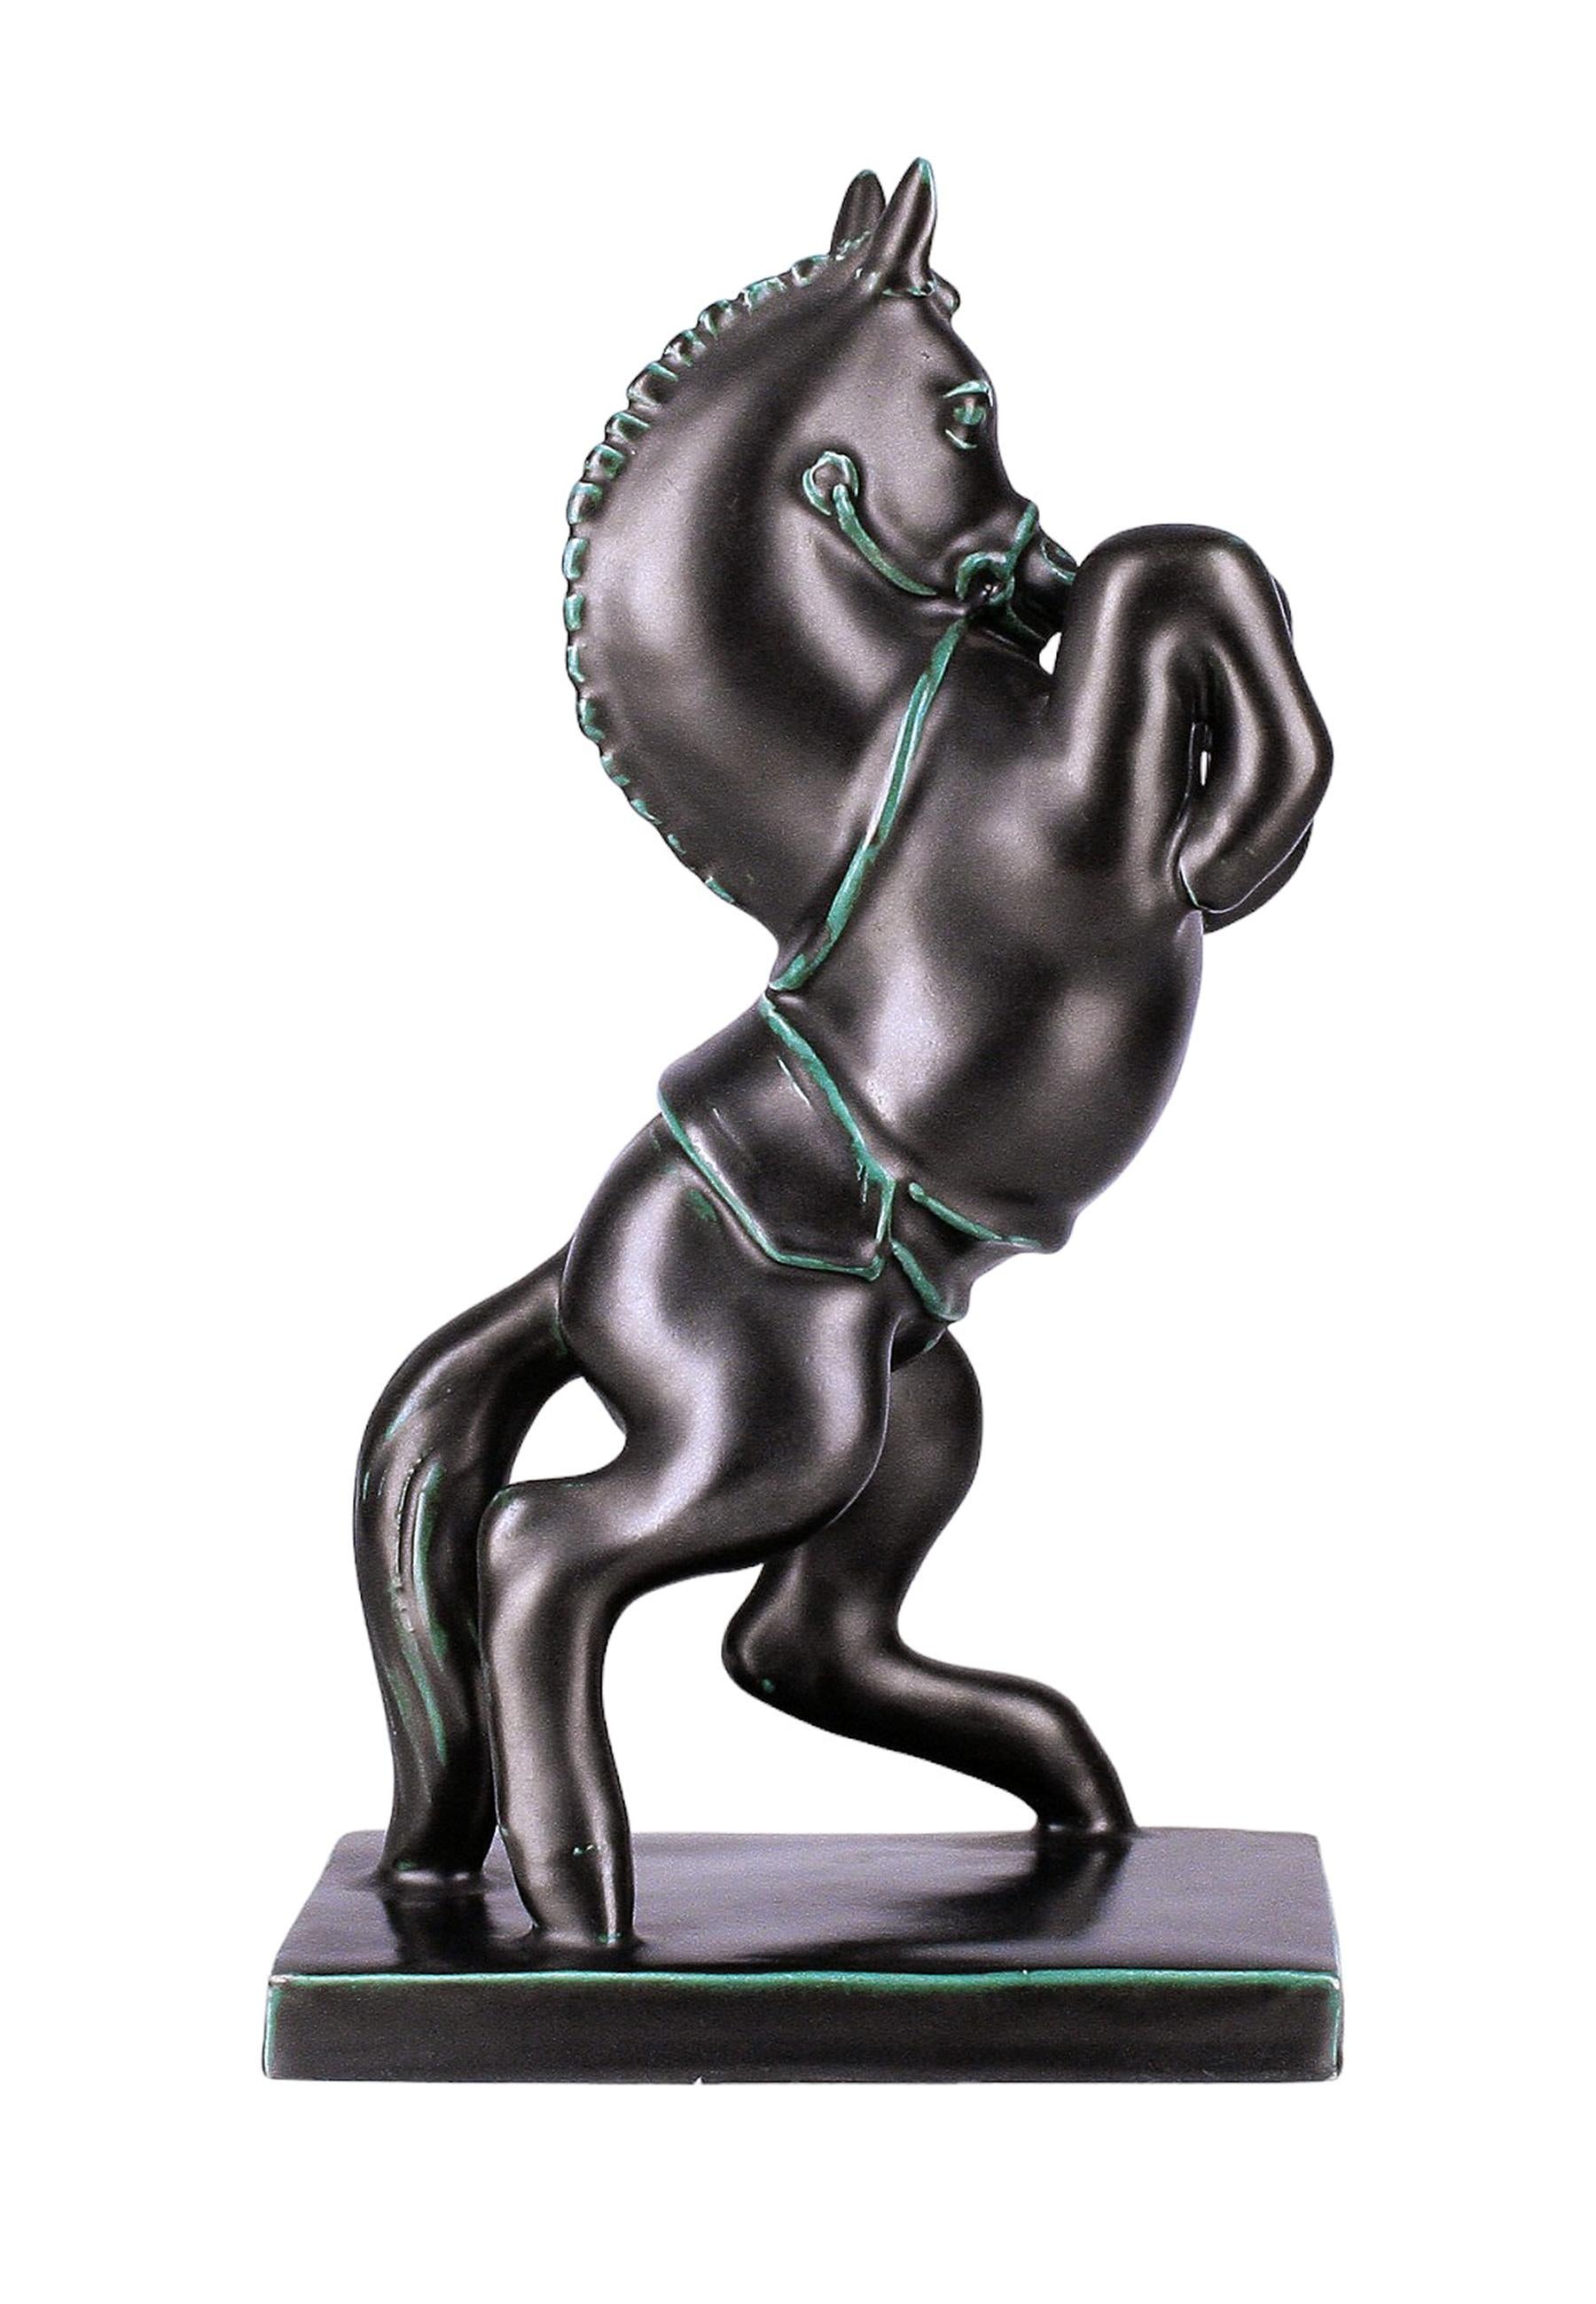 Hand-Crafted Mid-20th Century Italian Black Ceramic Rearing Horse Sculpture by Ugo Zaccagnini For Sale